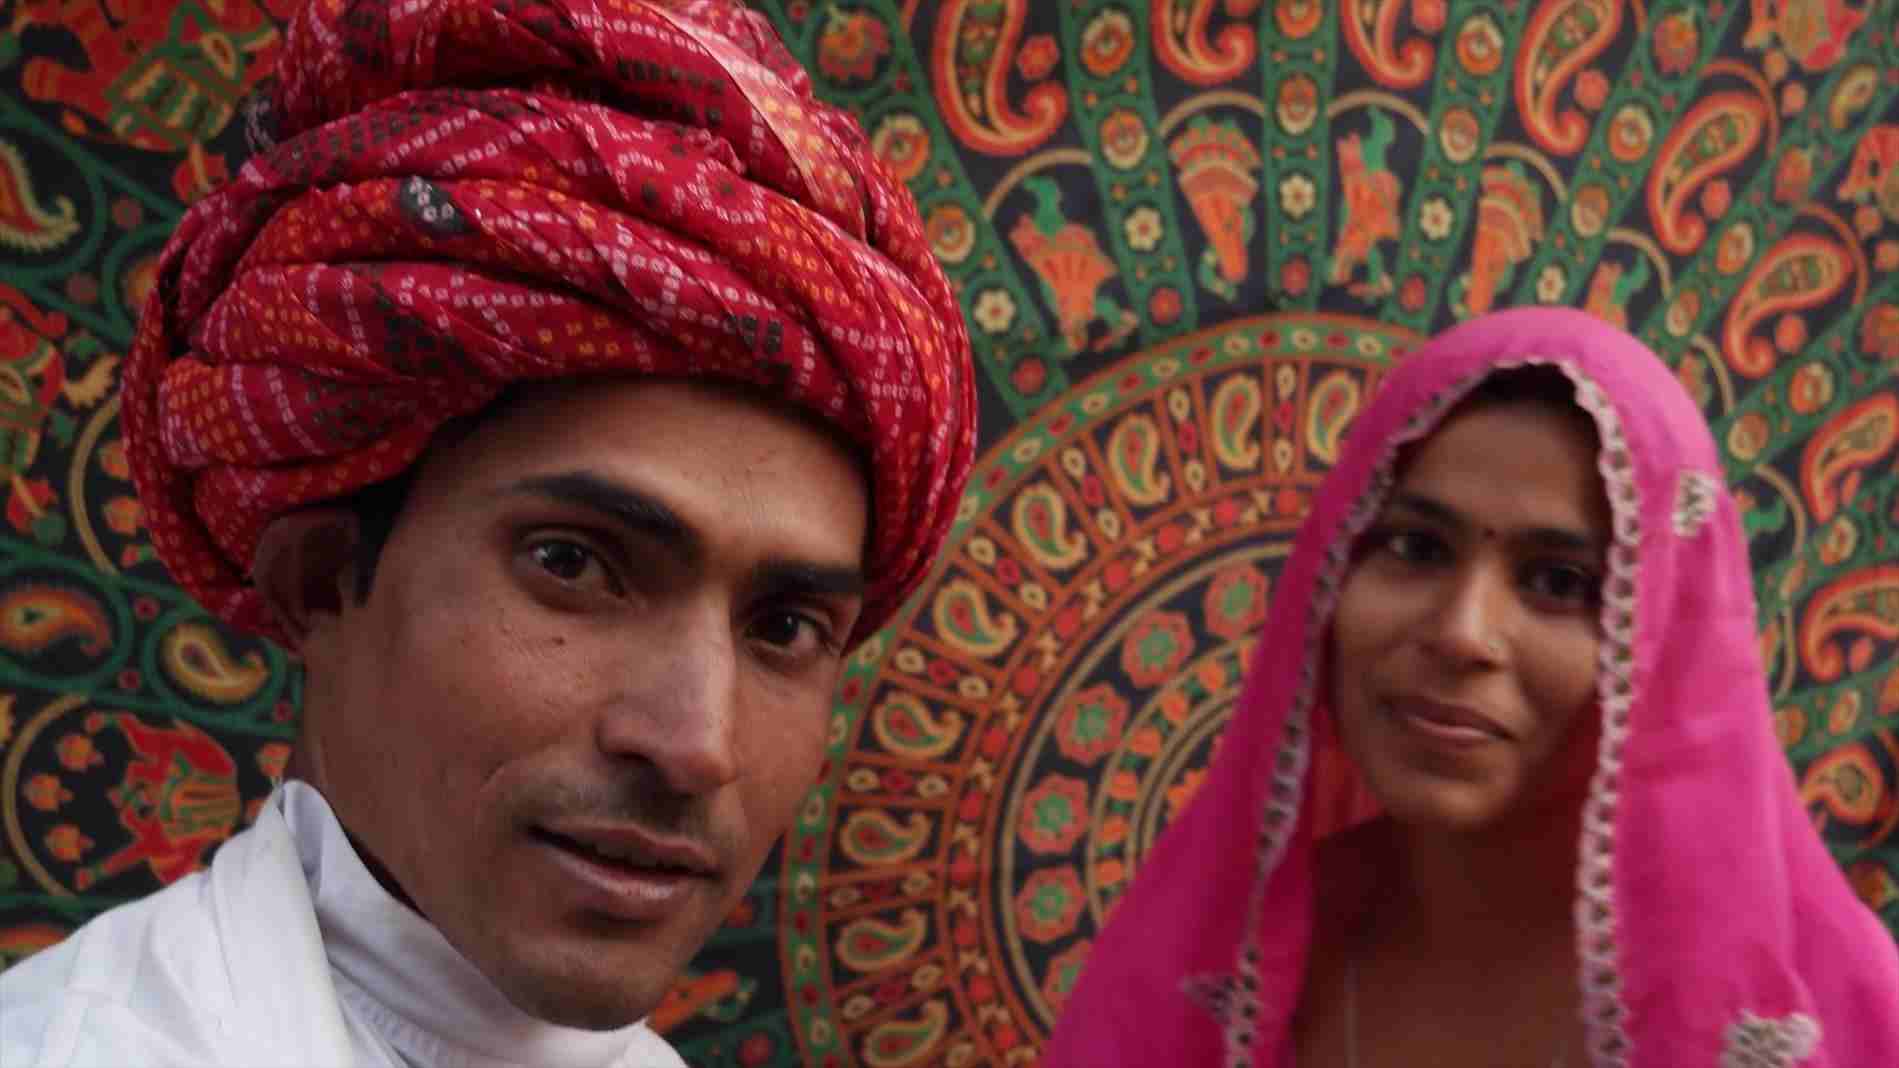 More Wallpaper Collections Dress Of Rajasthan Couple Wallpaper & Background Download